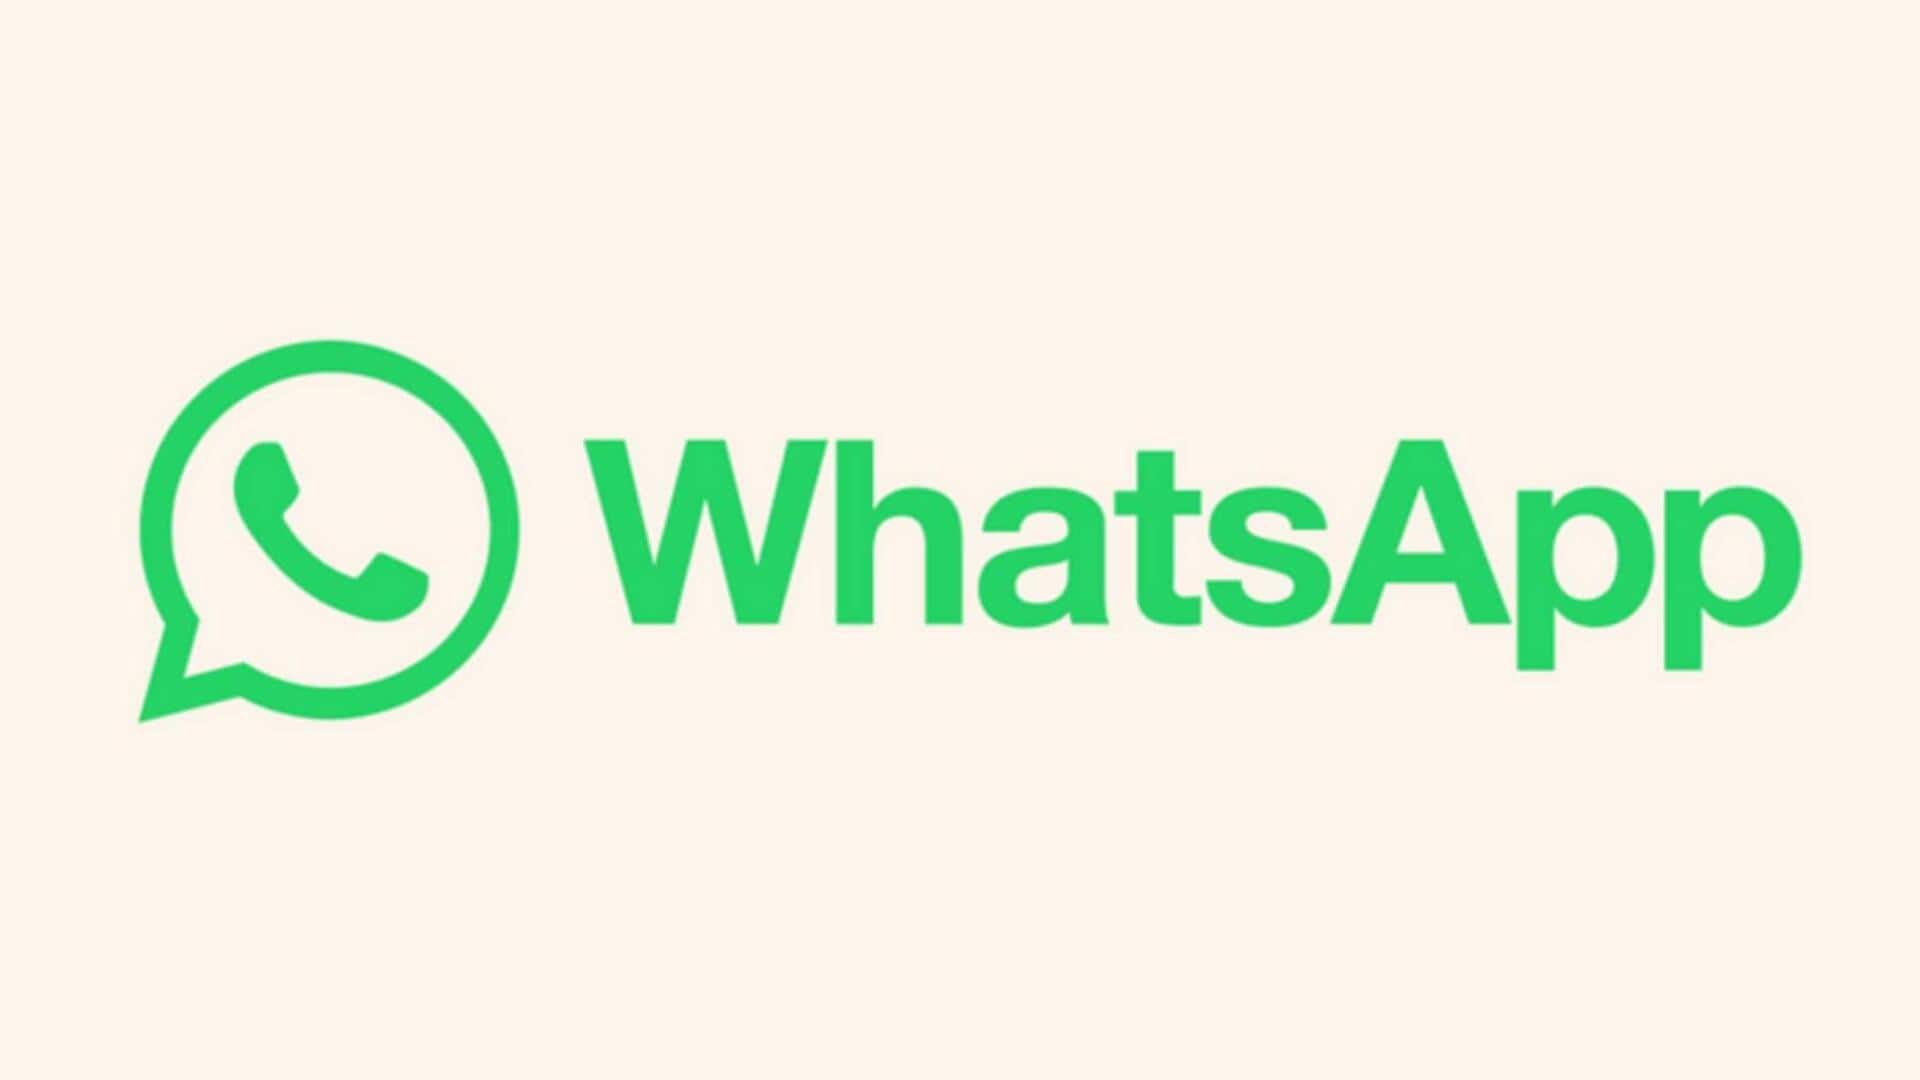 WhatsApp will soon let you share statuses to Instagram